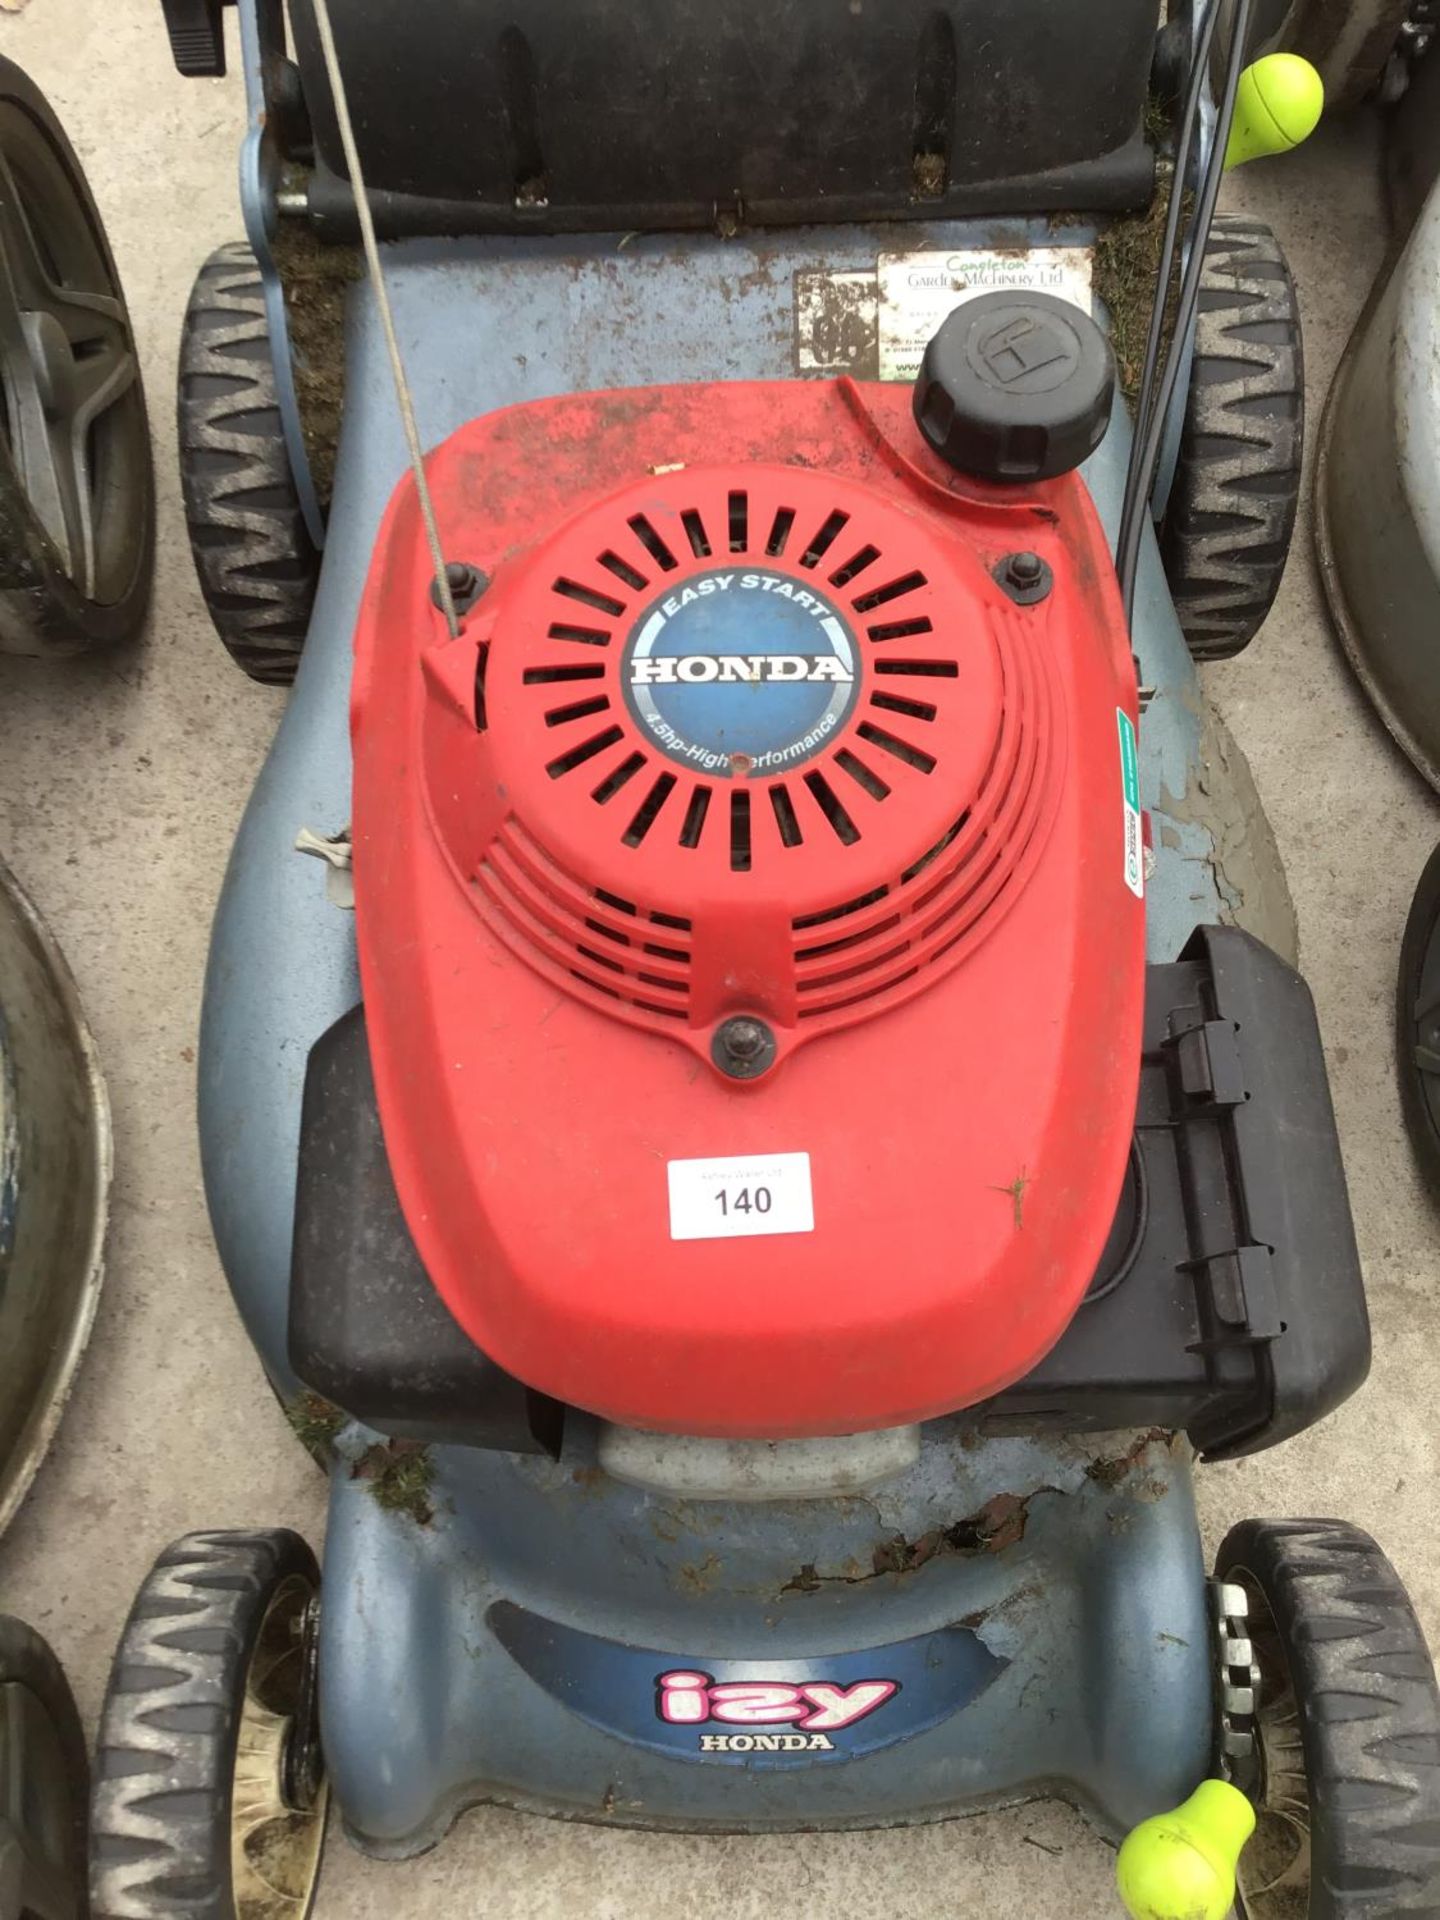 A HONDA IZY 18 INCH PETROL LAWNMOWER IN WORKING ORDER - Image 2 of 2